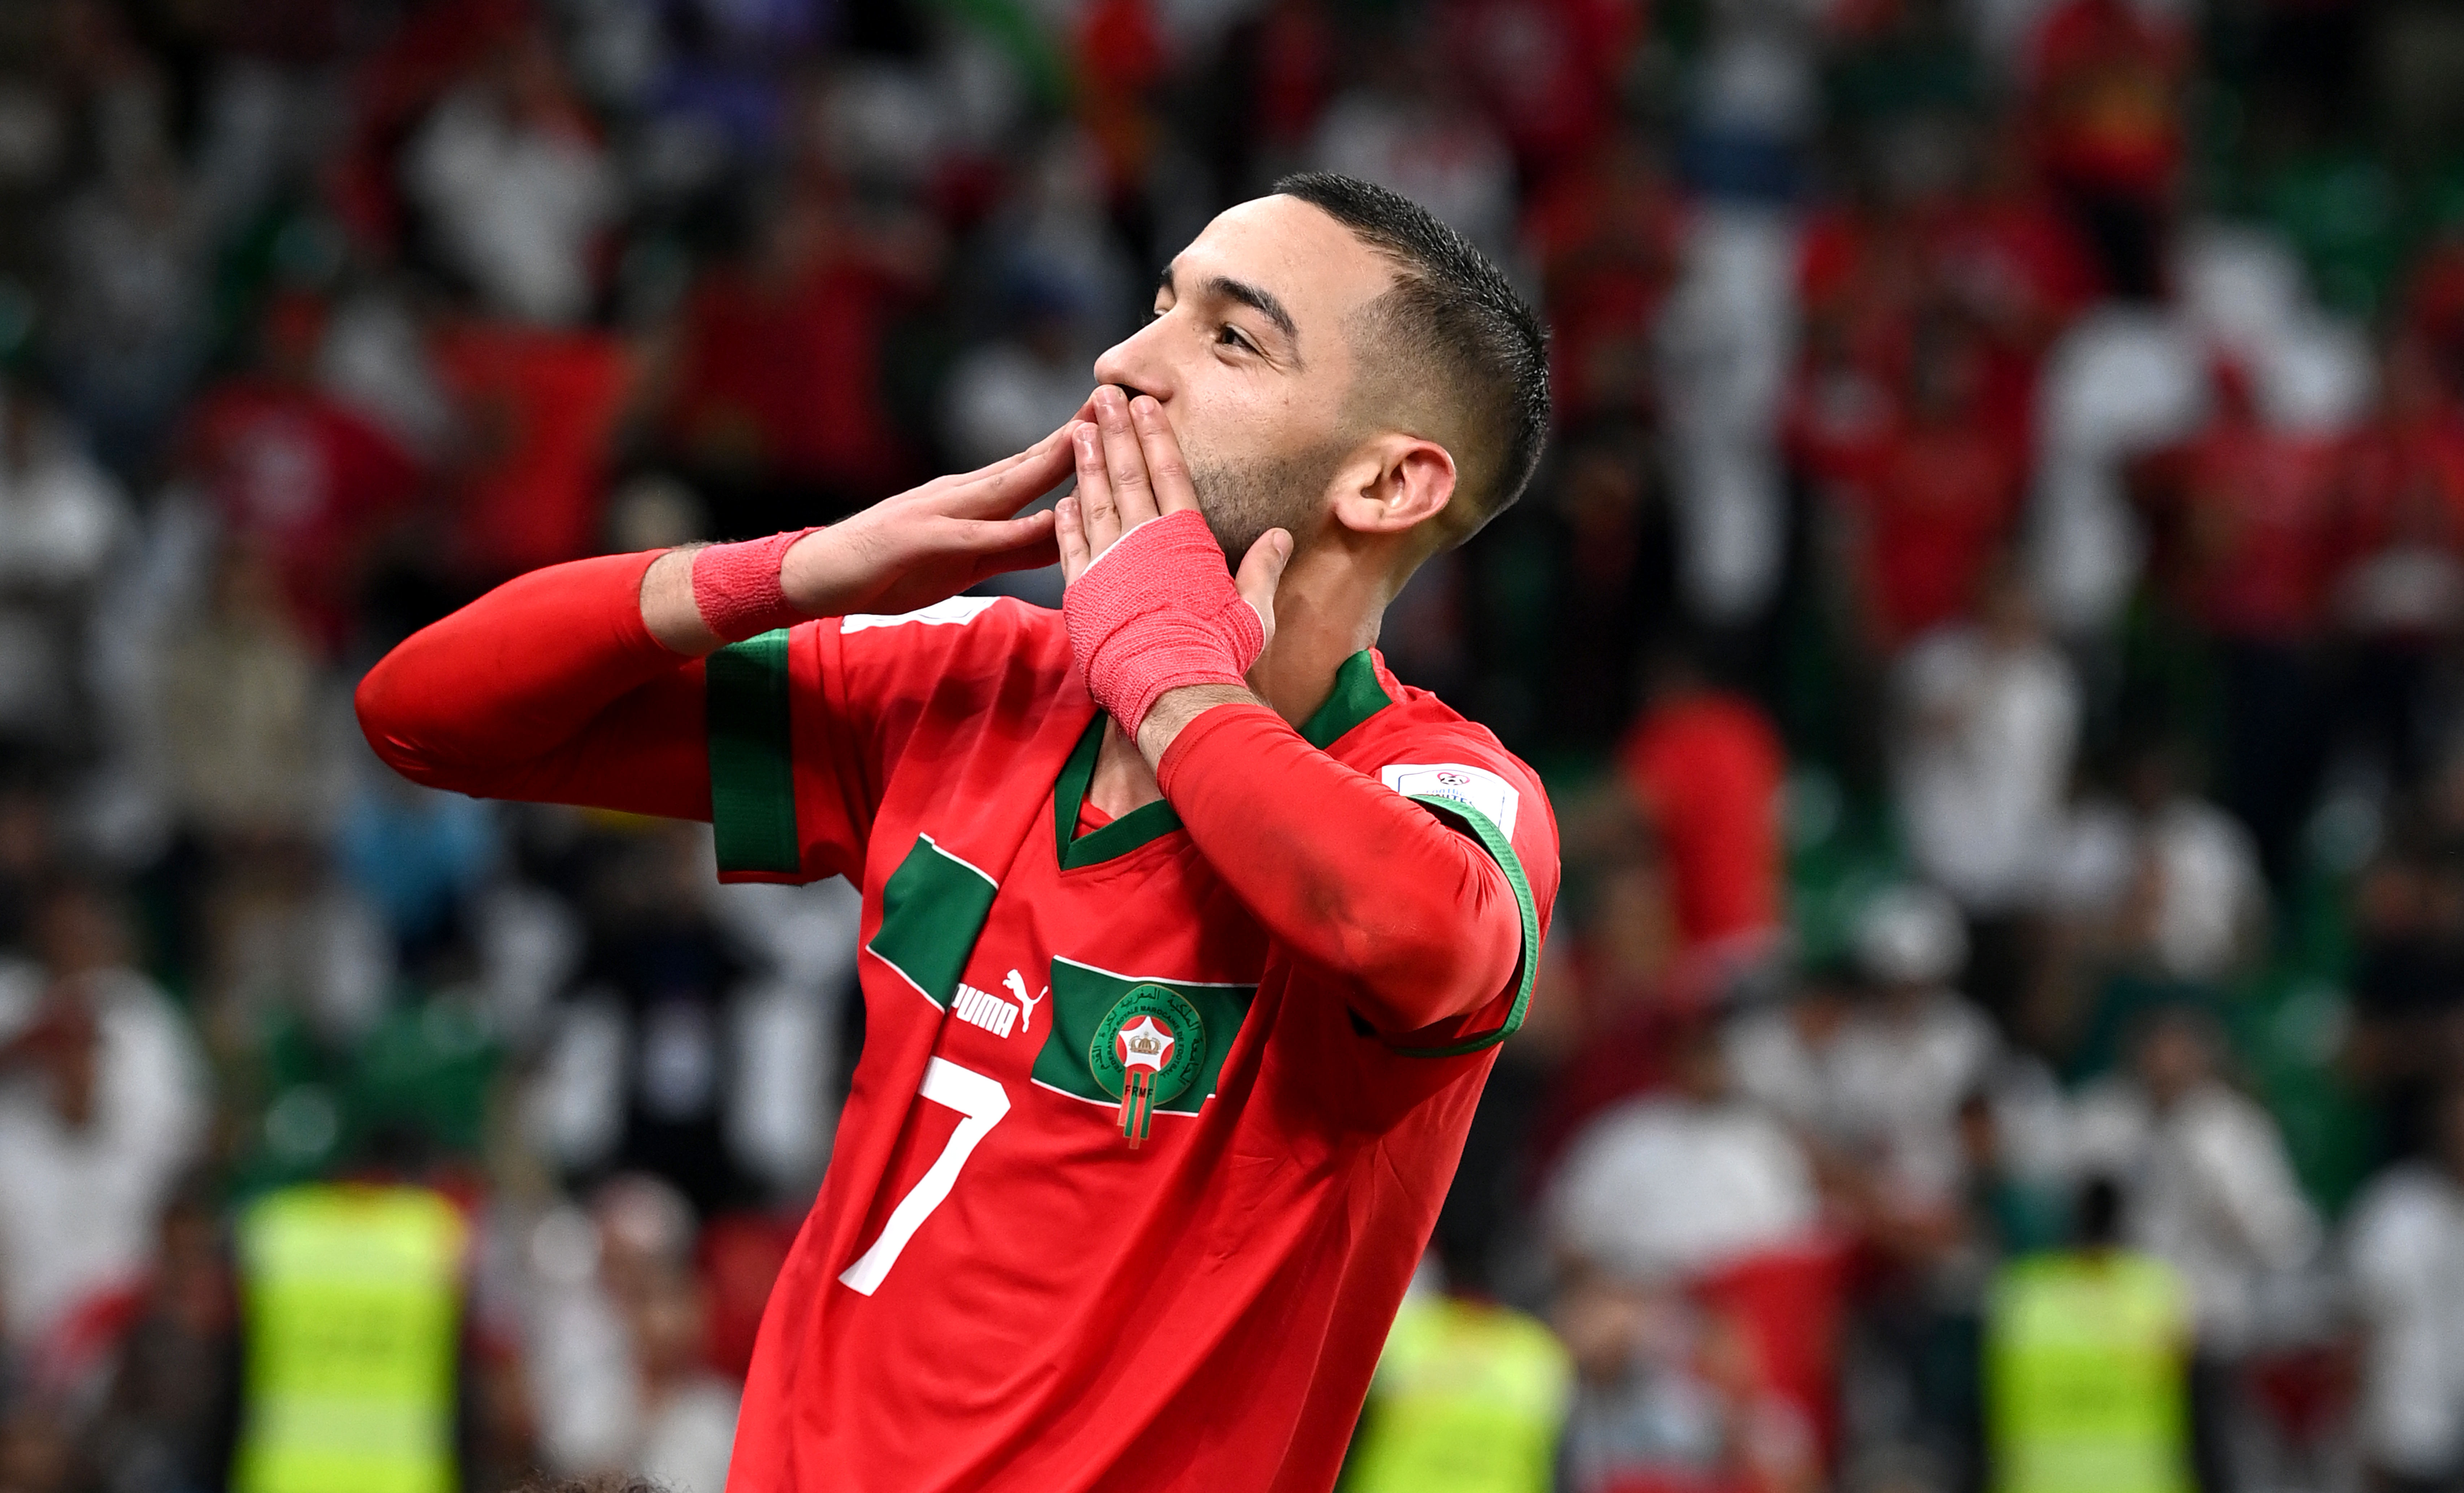 Hakim Ziyech Donates 2022 World Cup Earnings to Poor in Morocco